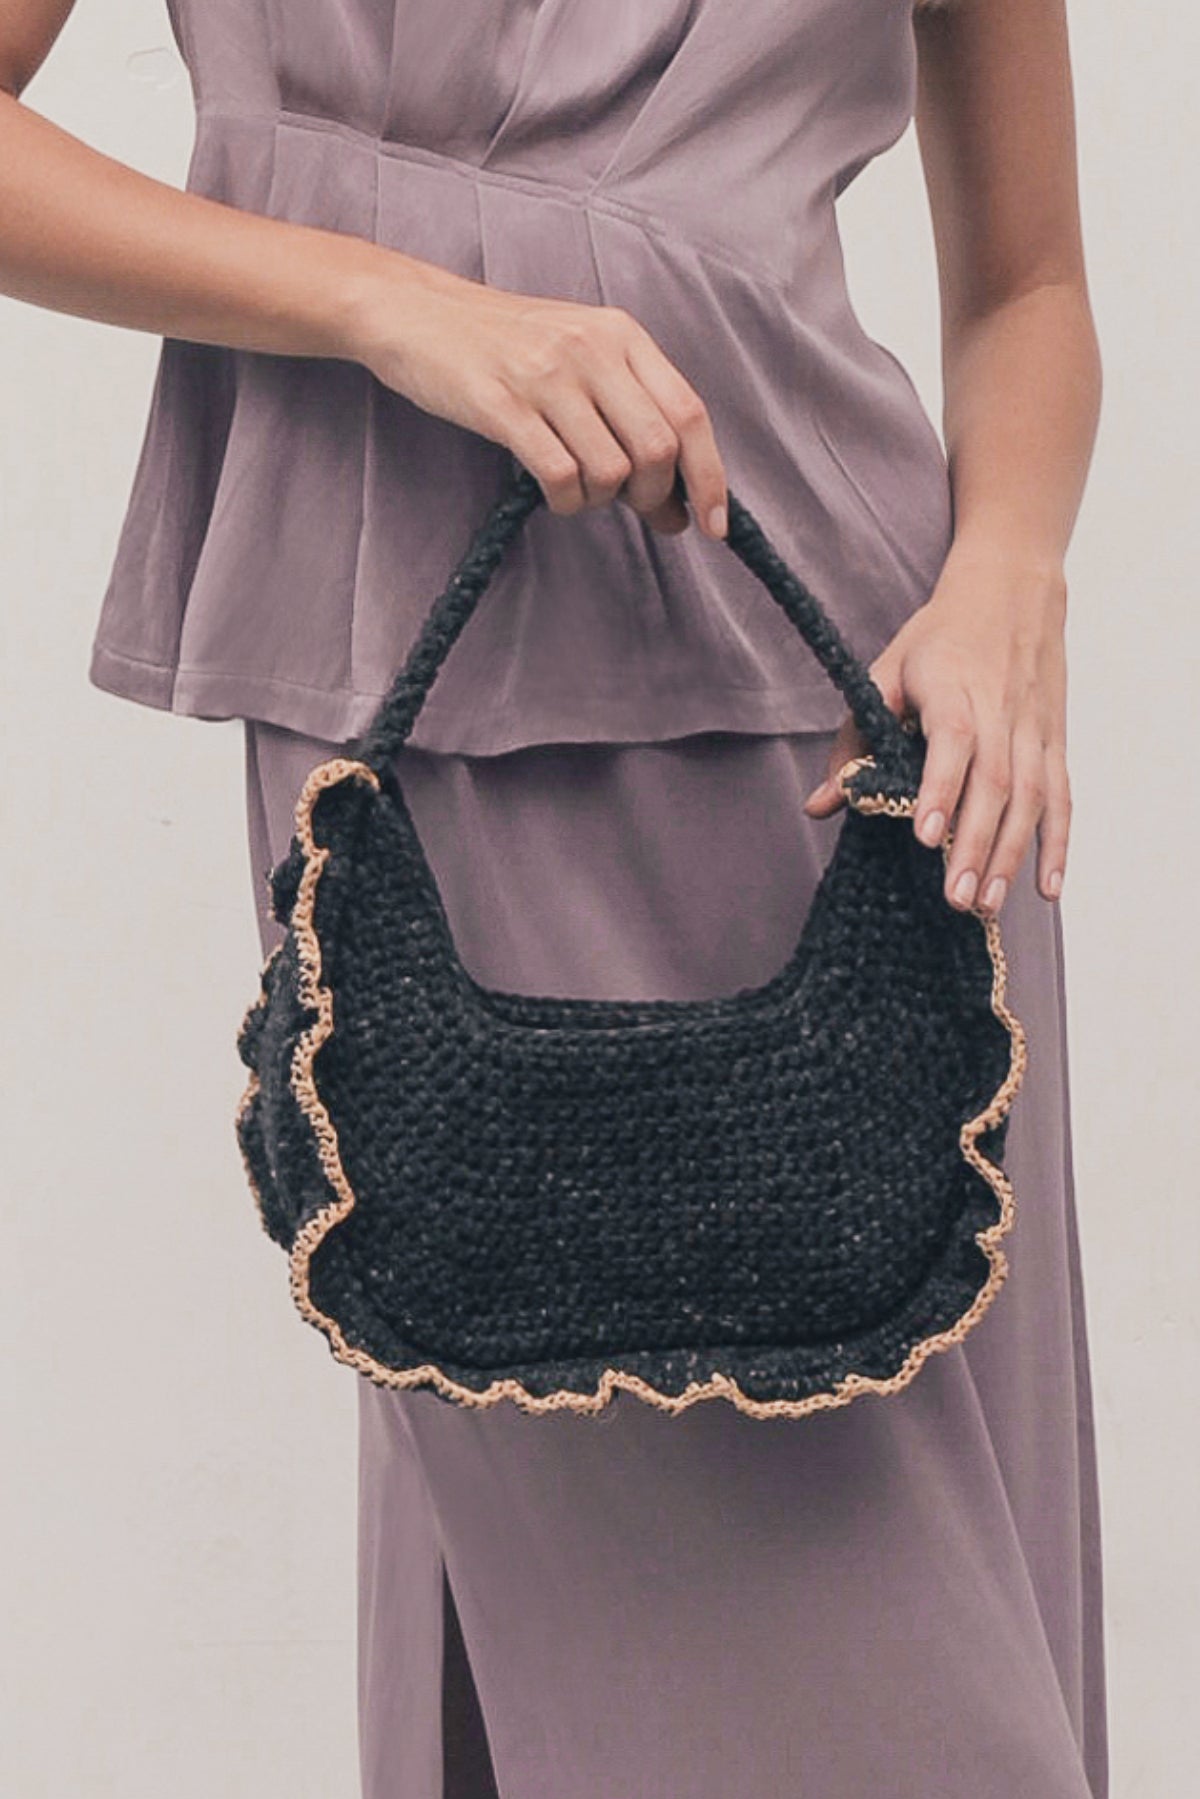 May_bag_black_Moneypenny_skirt_Trouvaille_blouse_Losange_smoky_purple-_1_.jpg